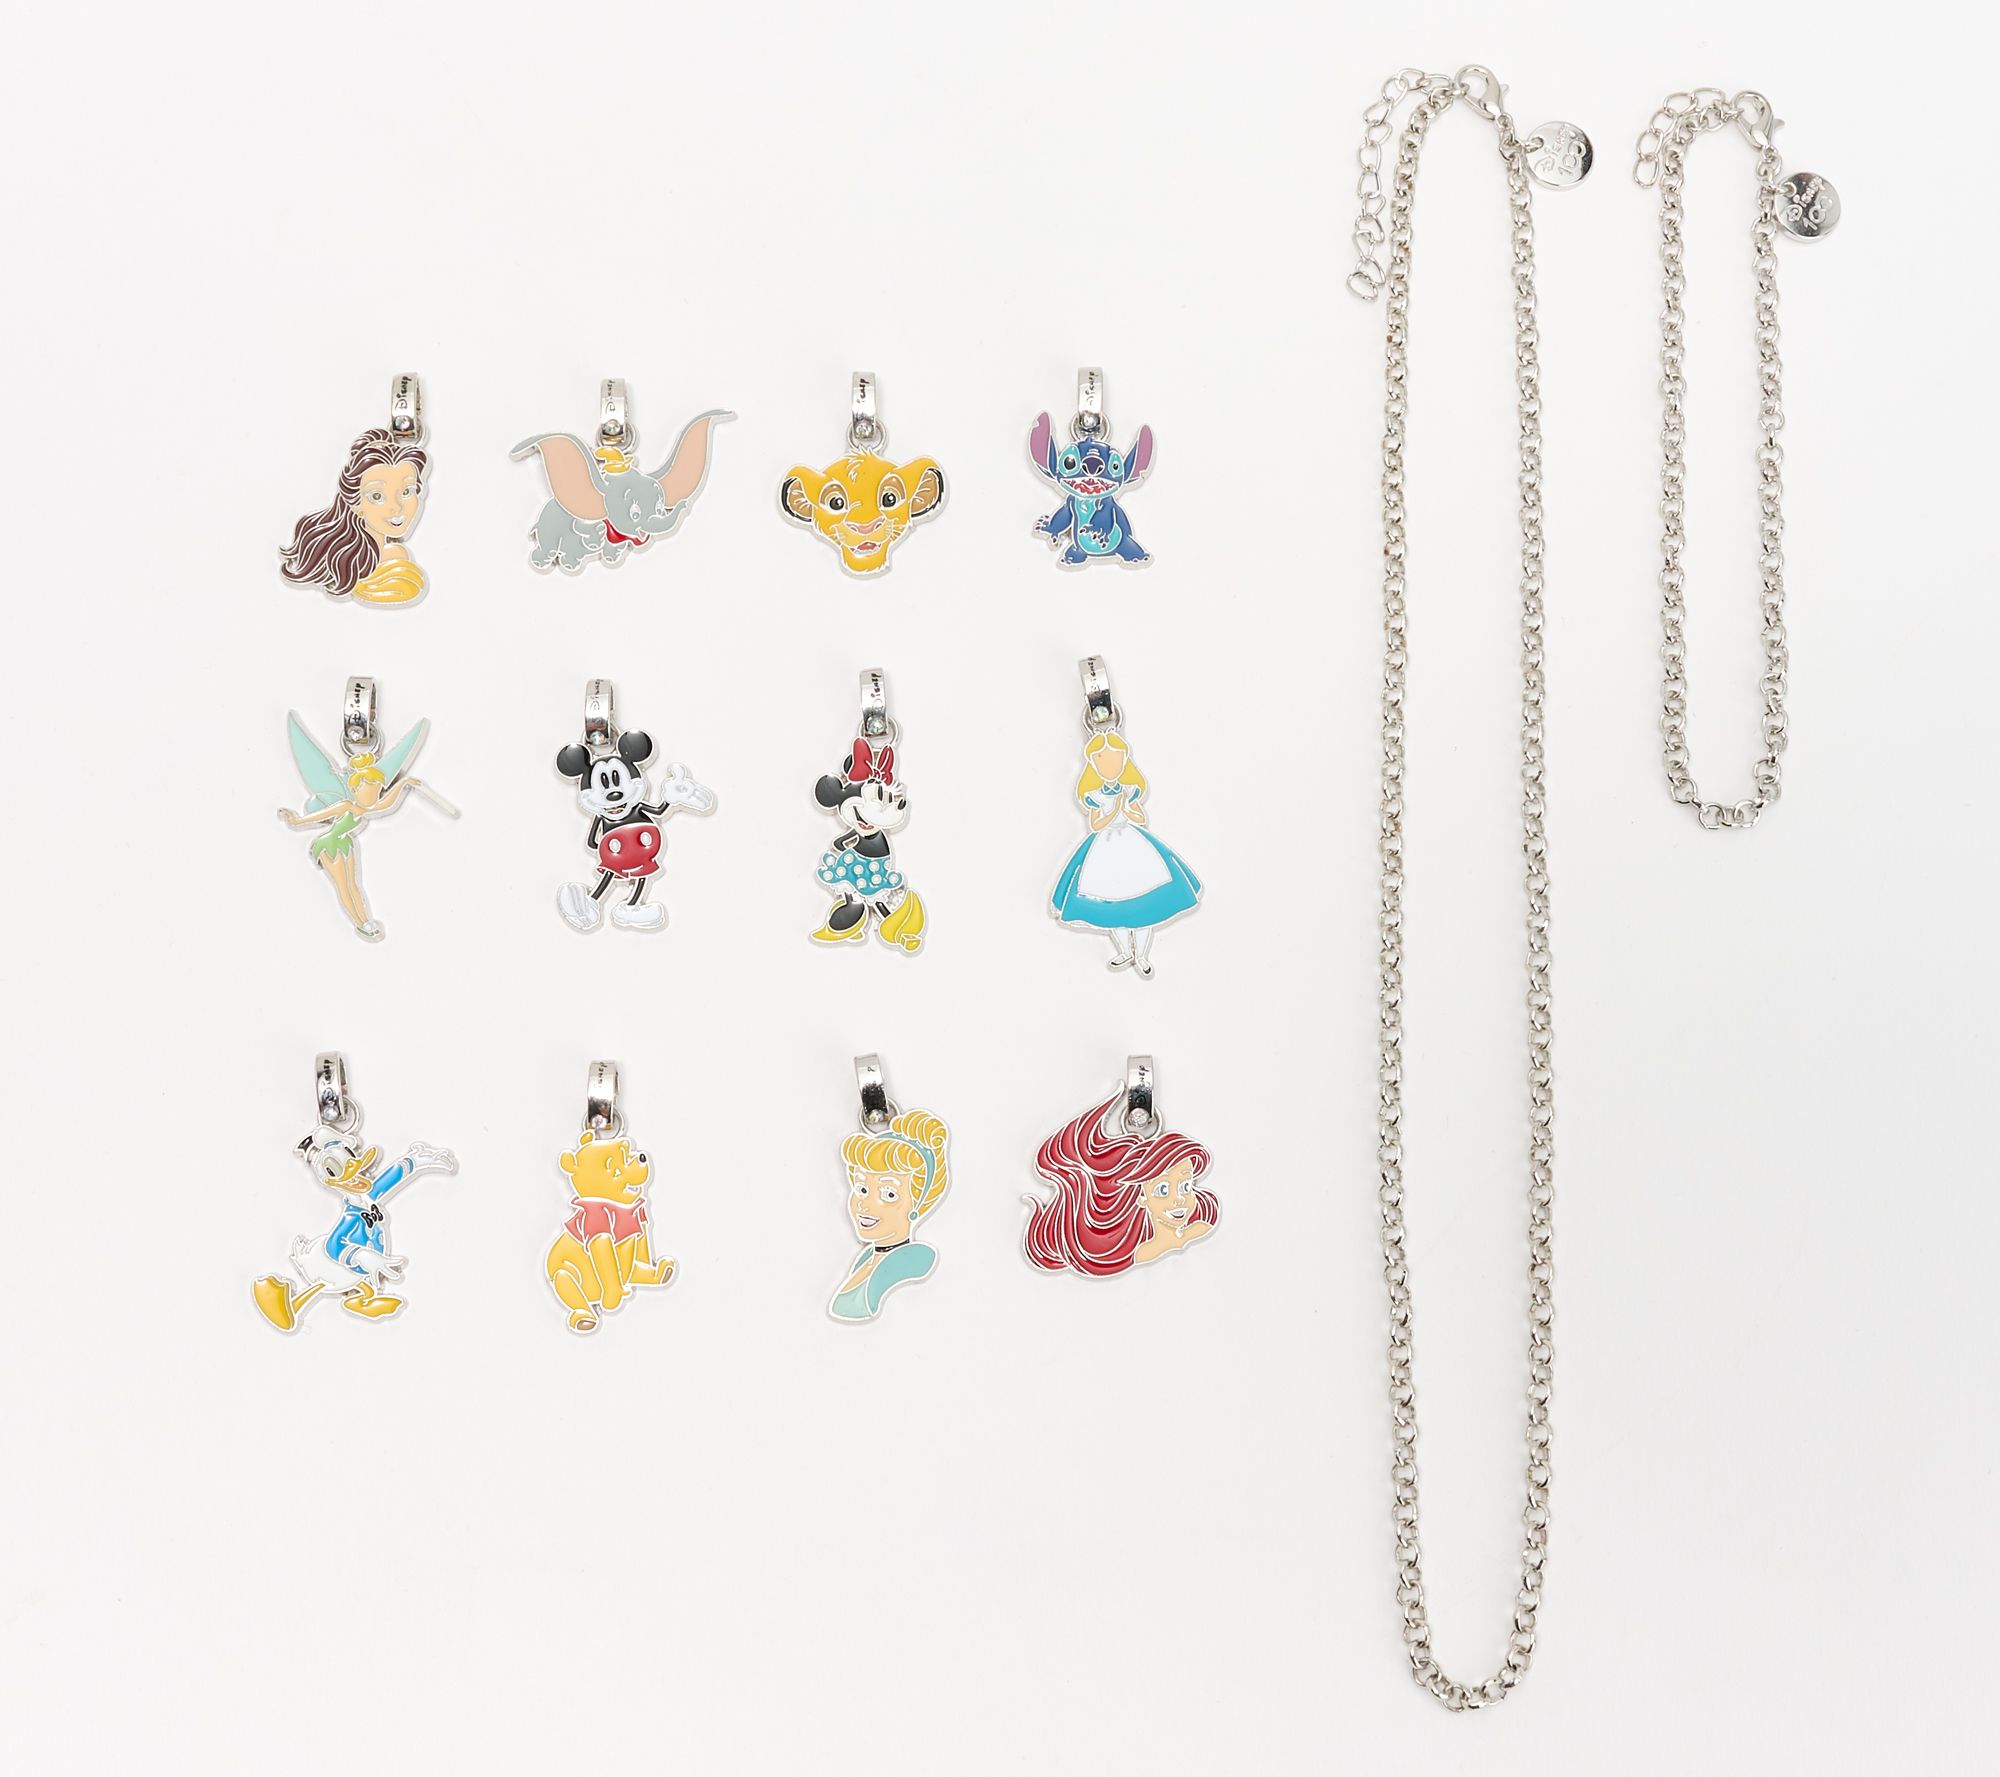 Dine Like A Princess With This Stunning Disney Dinner Set - Shop 